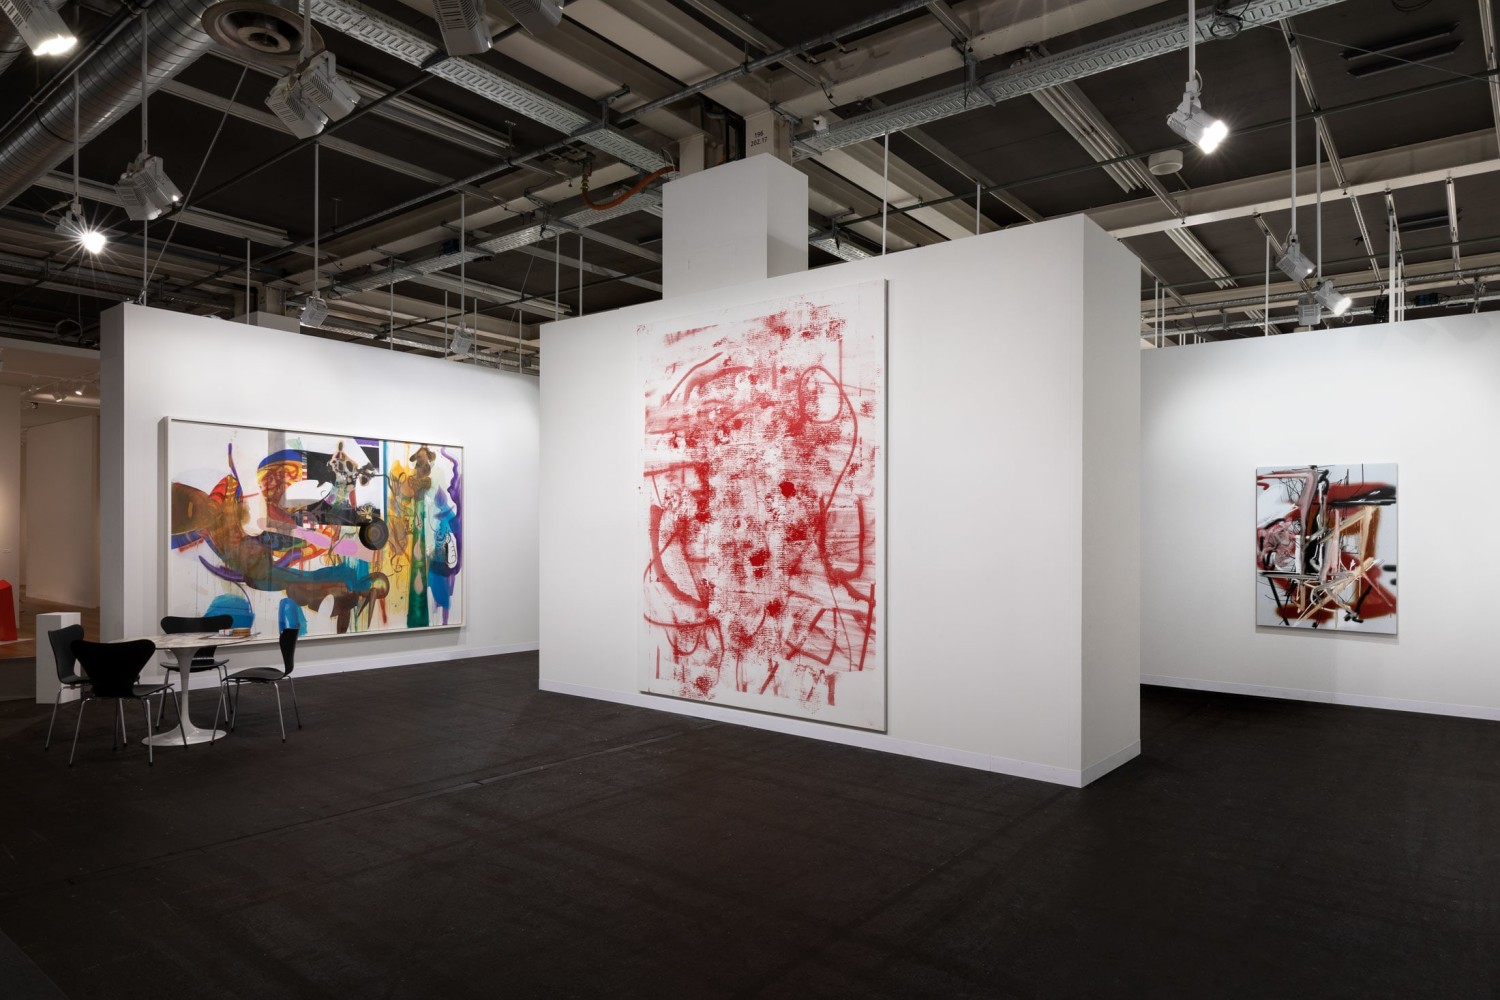 Luhring Augustine

Art Basel, Booth A3

Installation view

2019

Pictured from left: Albert Oehlen, Christopher Wool, Jeff Elrod